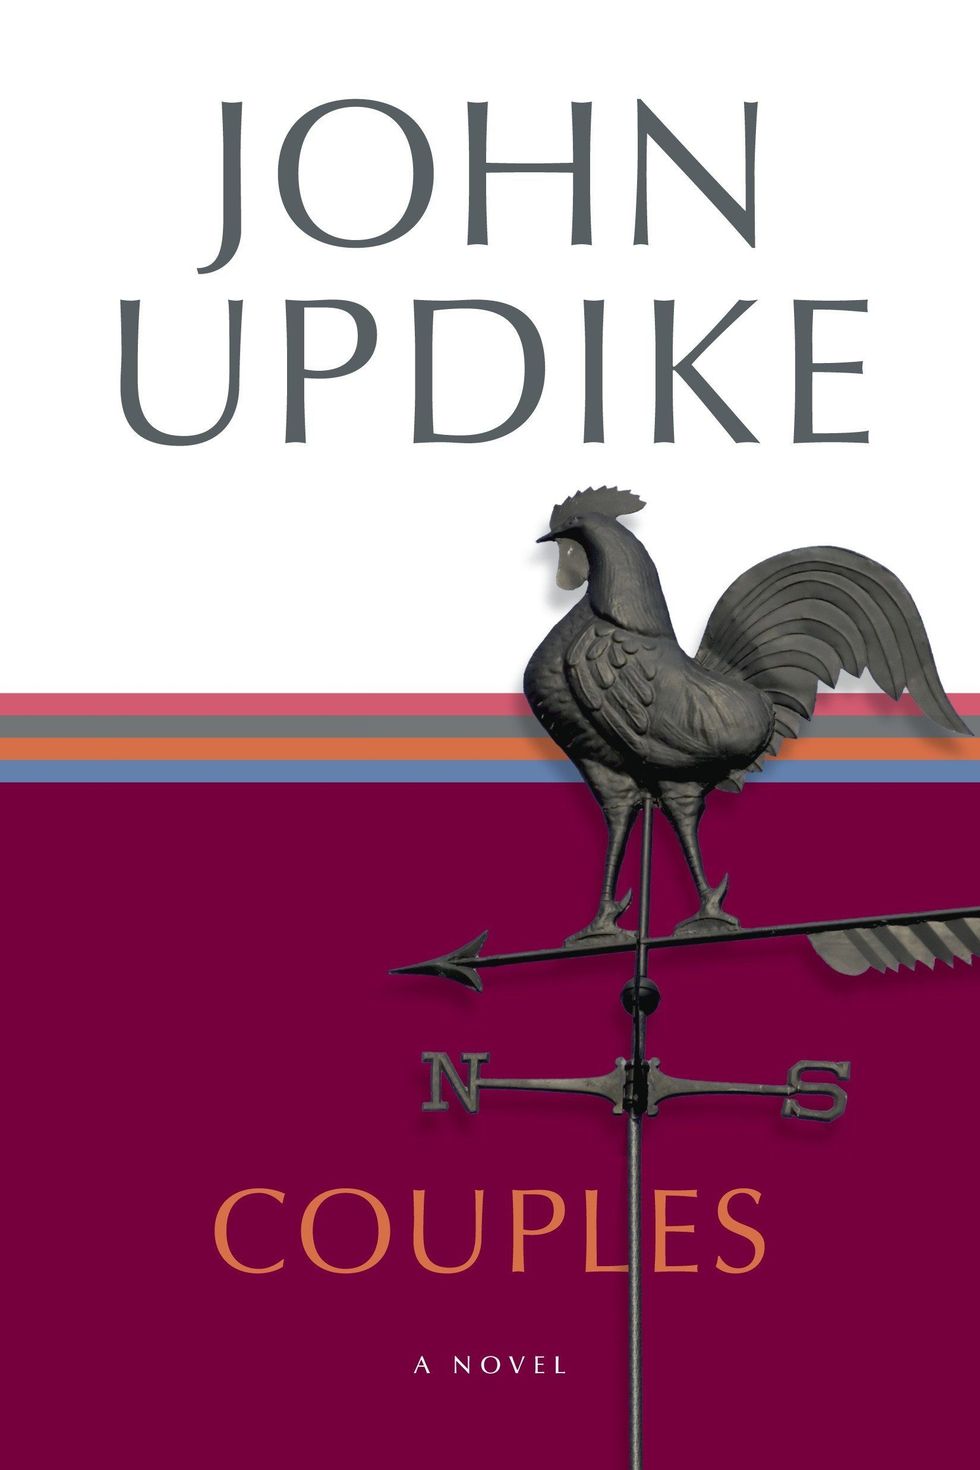 ‘Couples,’ by John Updike